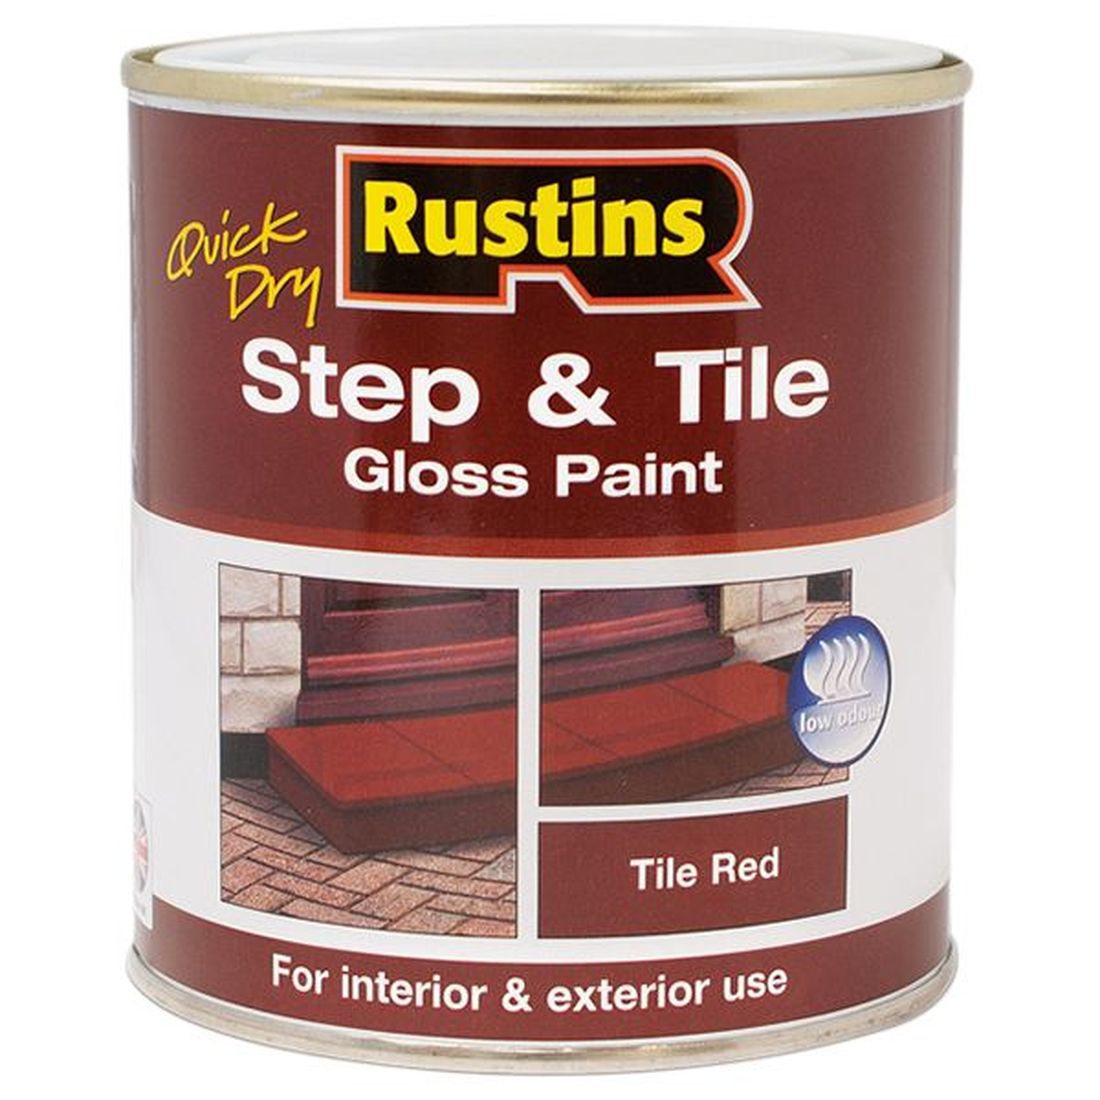 Rustins Quick Dry Step & Tile Paint Gloss Red 250ml                                     